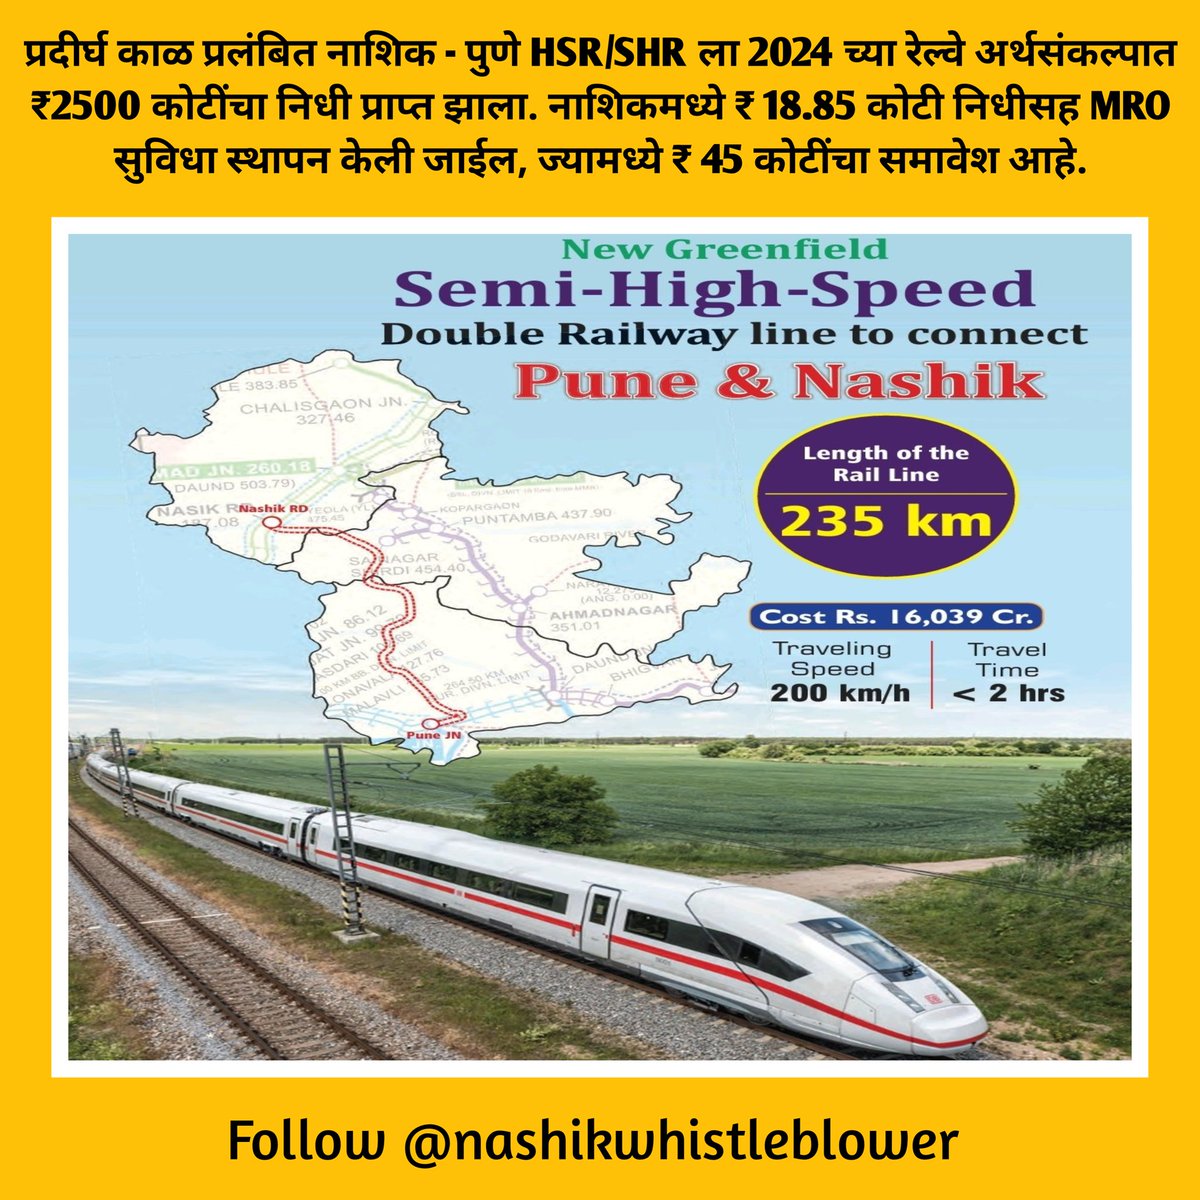 Long-pending #Pune - #Nashik HSR/SHR receives funding of ₹2500 Crore in the 2024 Railway Budget. An MRO facility will be established in #Nashik with ₹18.85 Crore in funding, including the ₹45 Crore that was previously granted in principle.